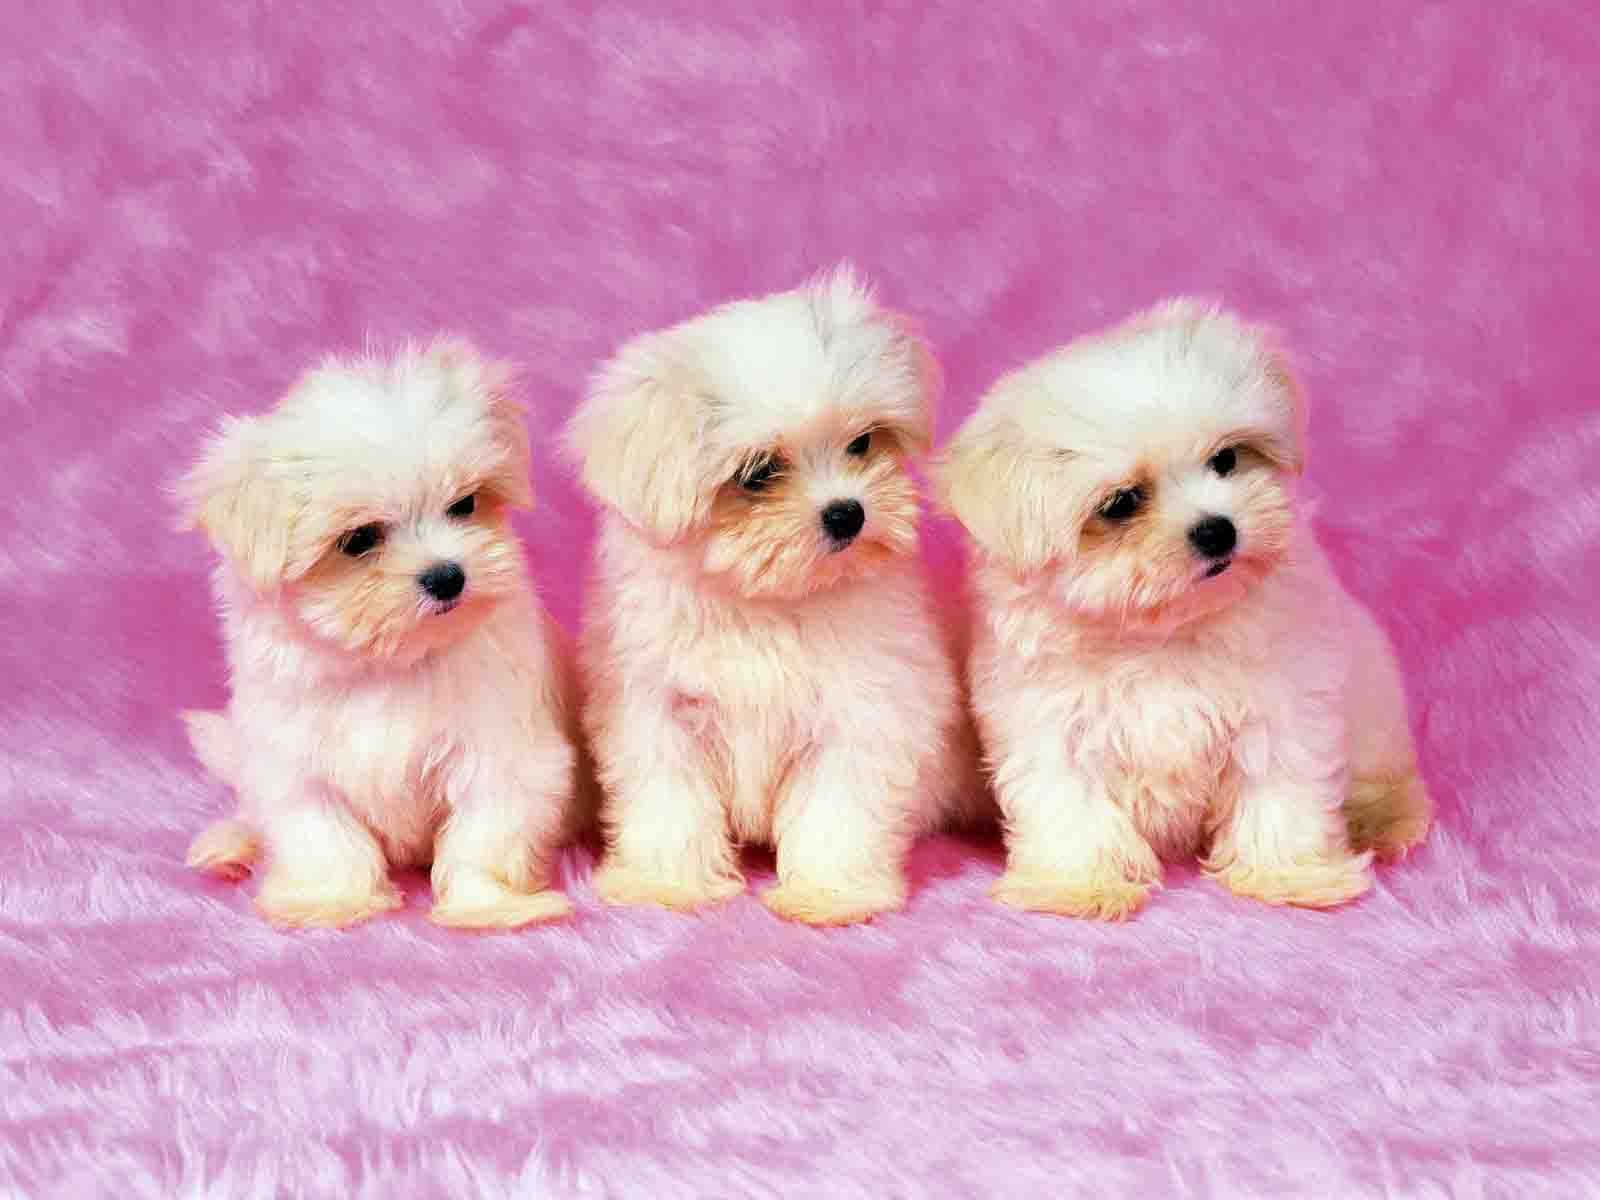 Three White Puppies Sitting On A Pink Background Wallpaper